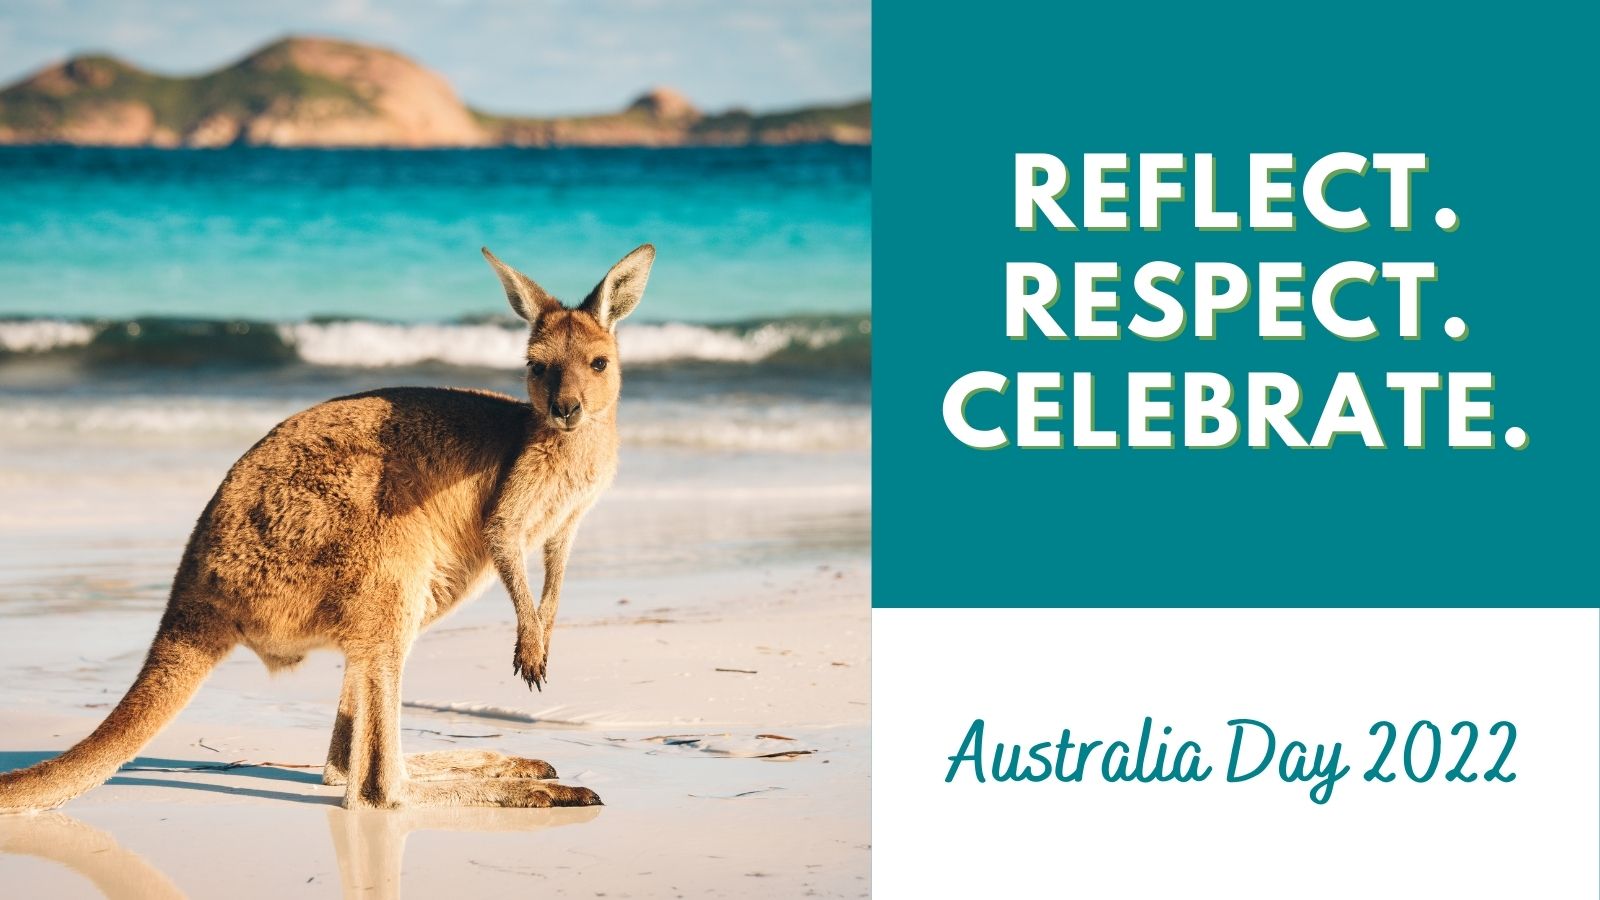 A kangaroo on a beach, with a banner \\\\\\\\\\\\\\\\\\\\\\\\\\\\\\\\\\\'Reflect. Respect. Celebrate"